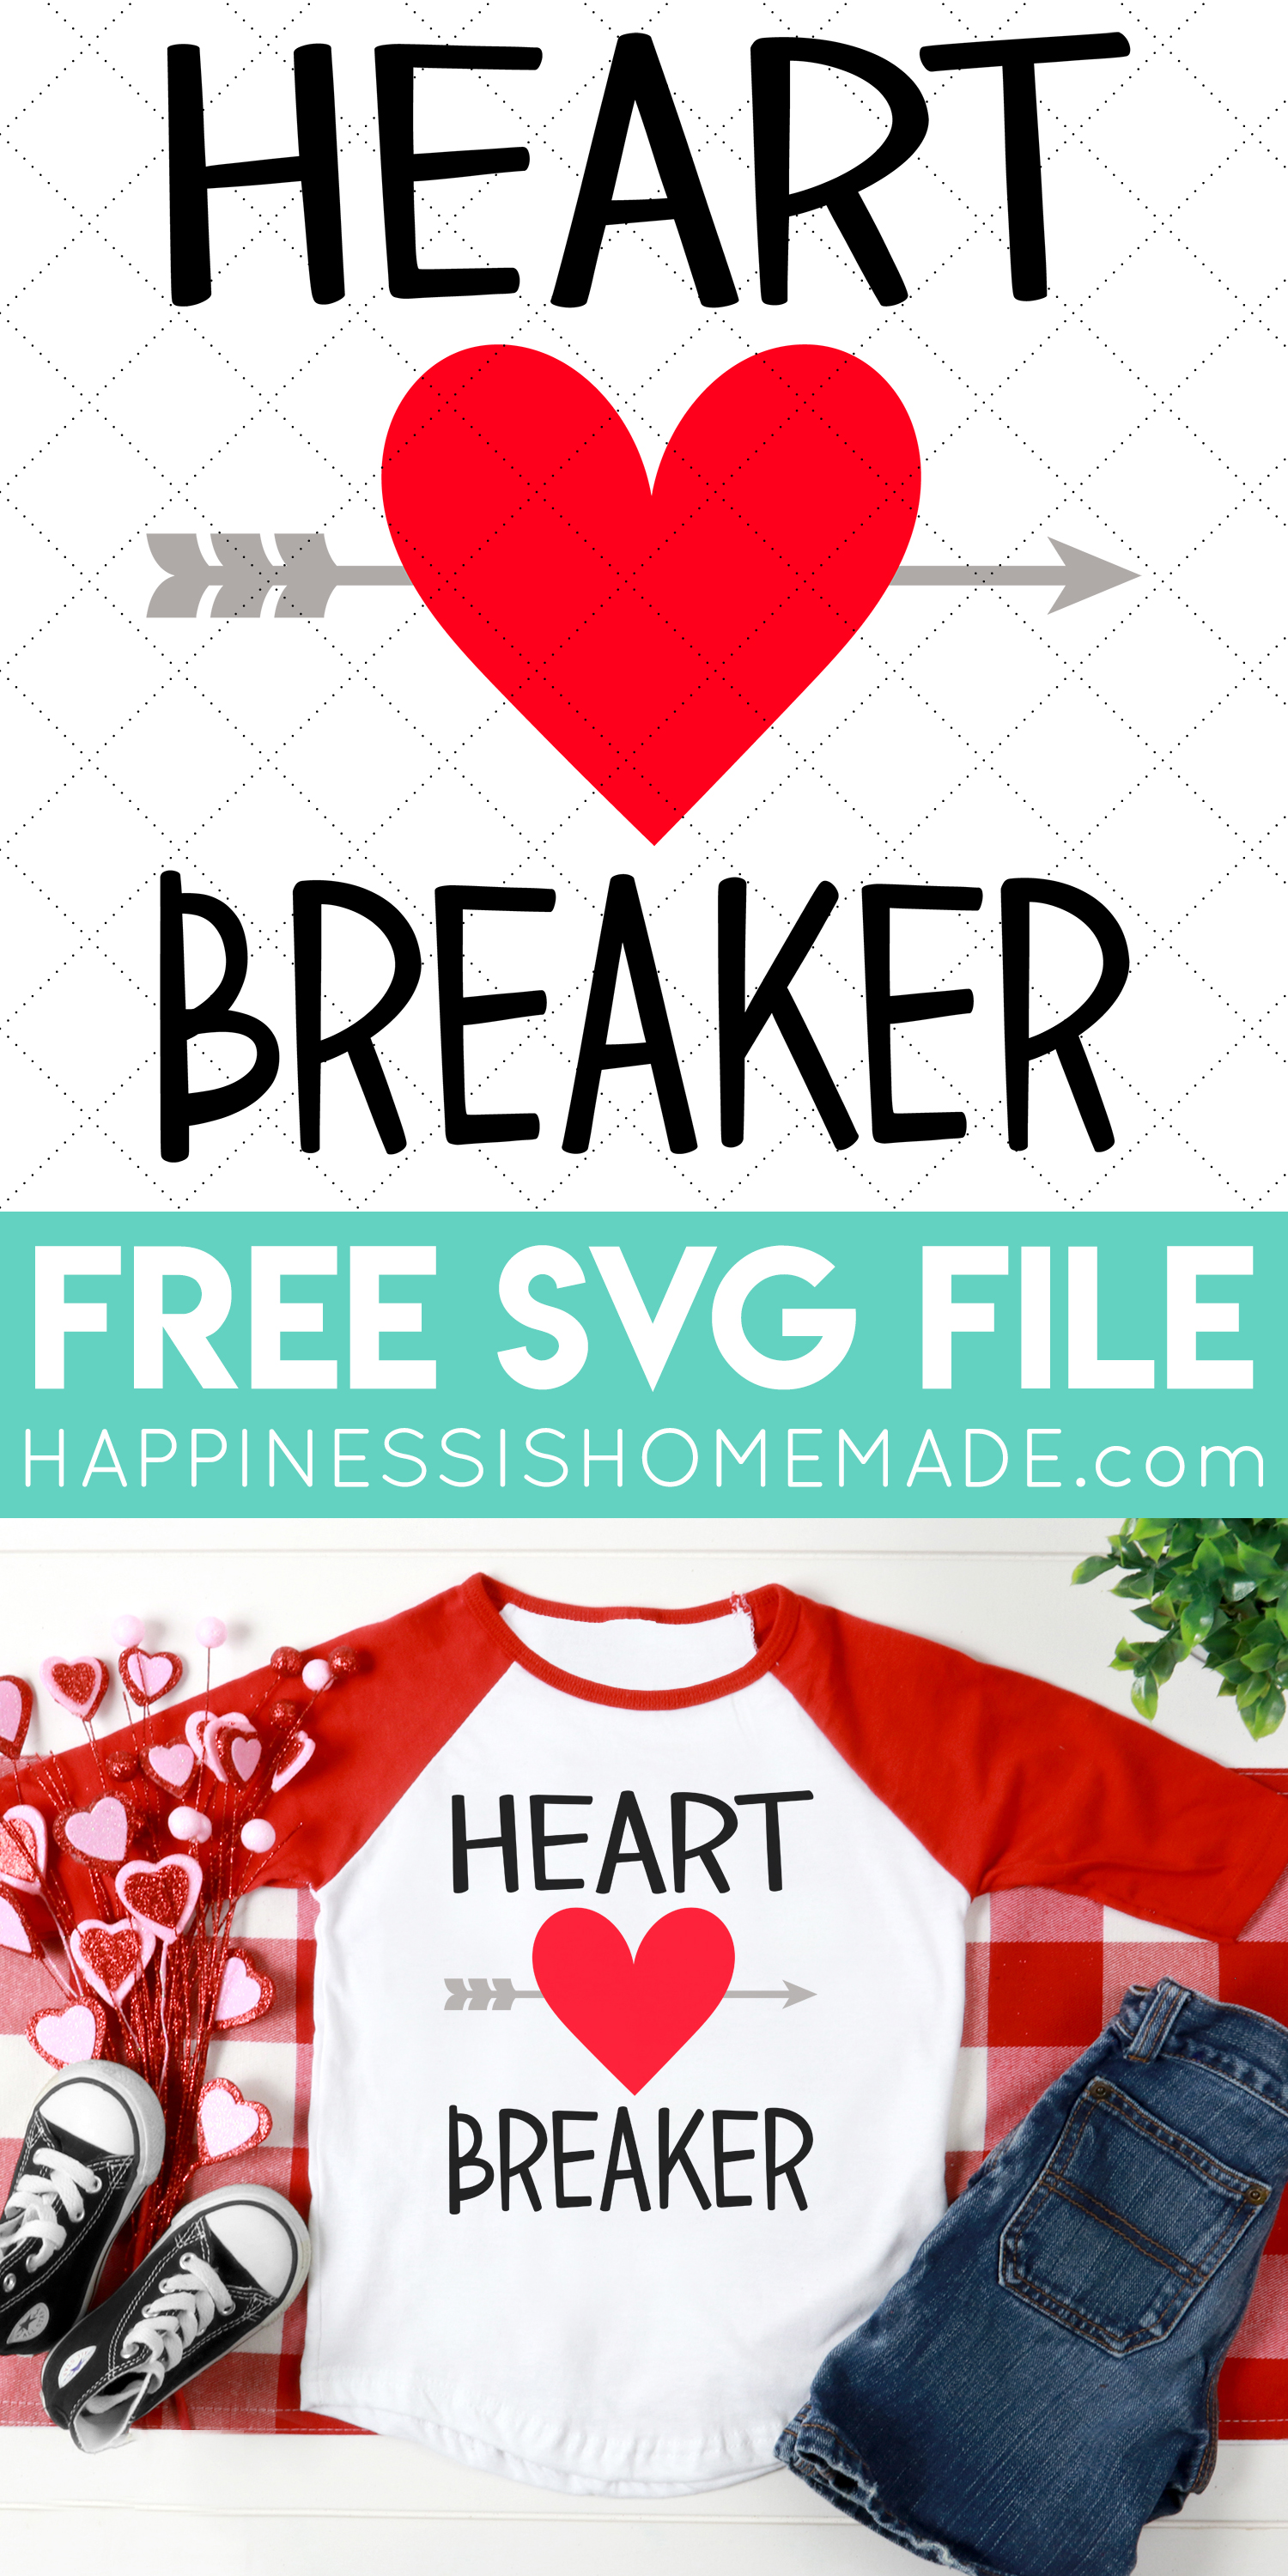 Free Valentine S Day Svgs Heart Breaker Shirt Happiness Is Homemade